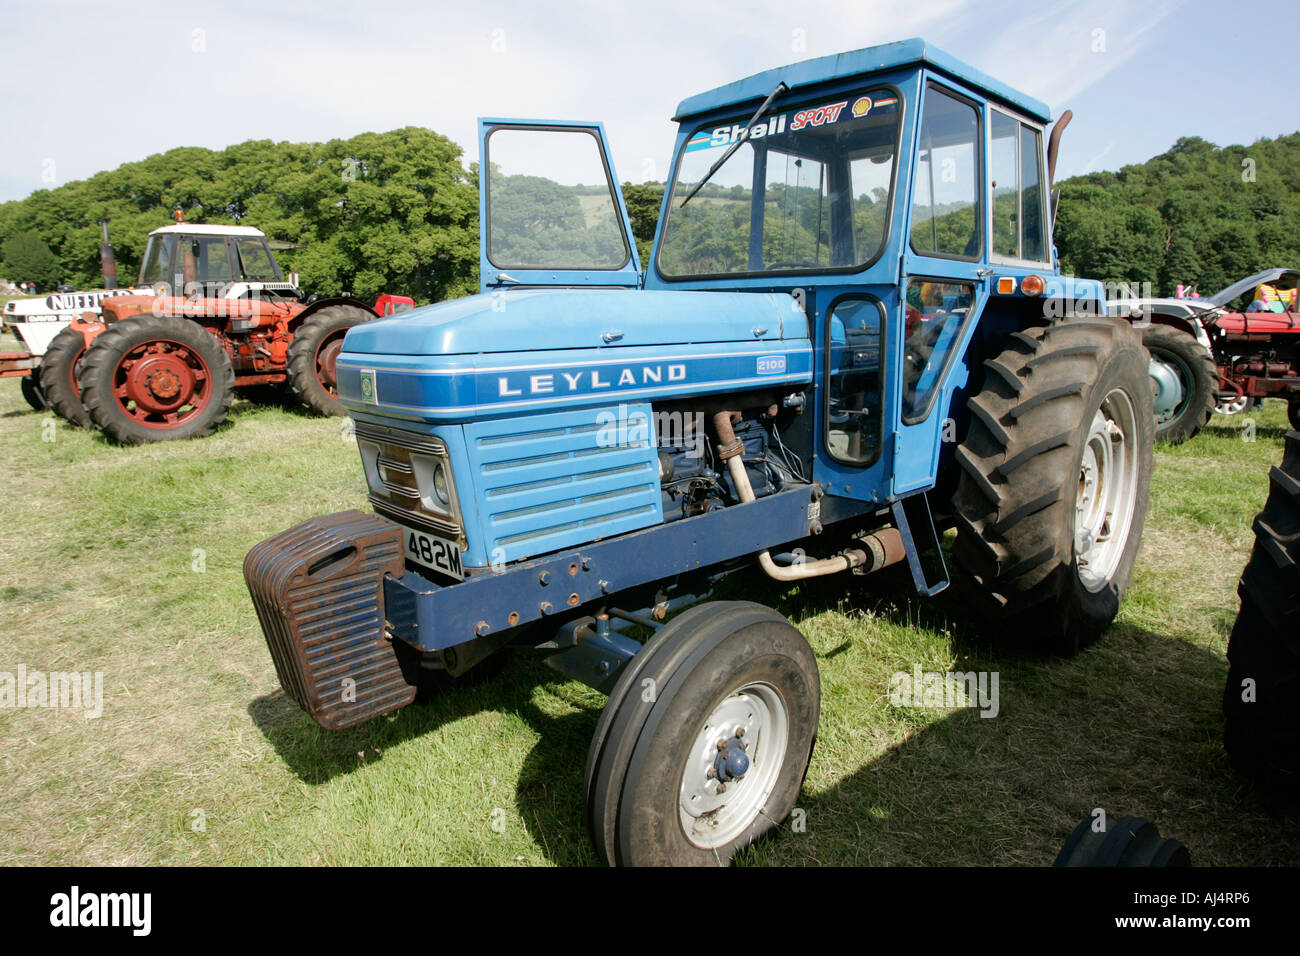 leyland 2100 classic tractor during vintage tractor rally at glenarm castle open day county antrim northern ireland Stock Photo